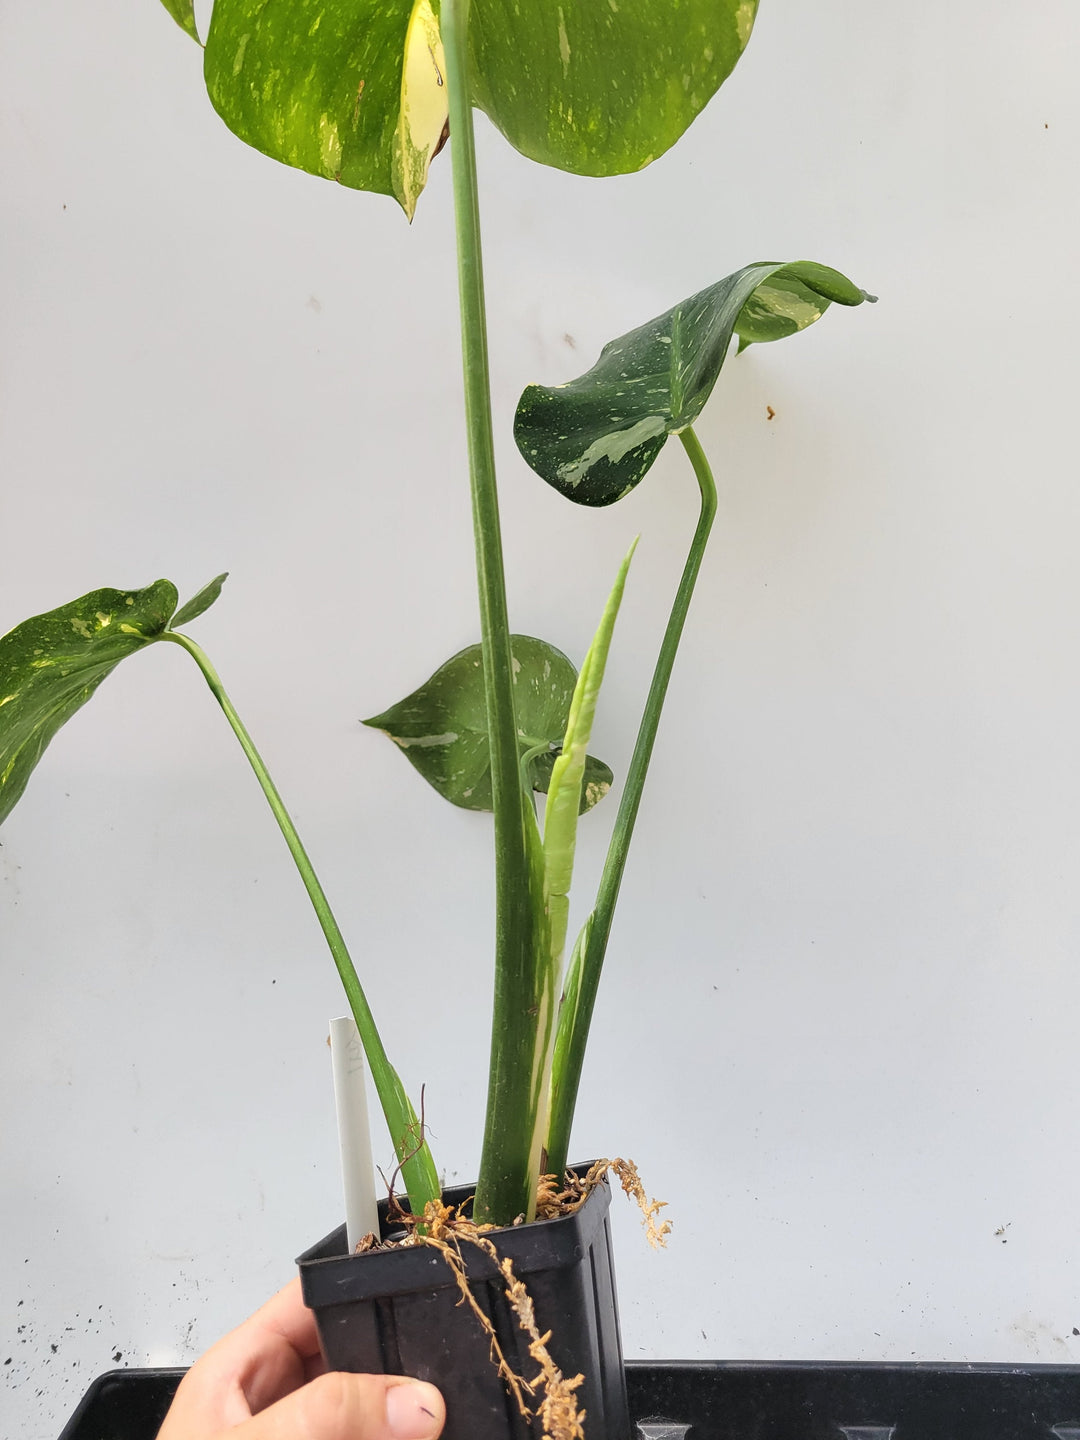 Monstera Thai Constellation,  XL size,  Highly variegated, Japanese Cultivar, exact plant pictured  US Seller #t41